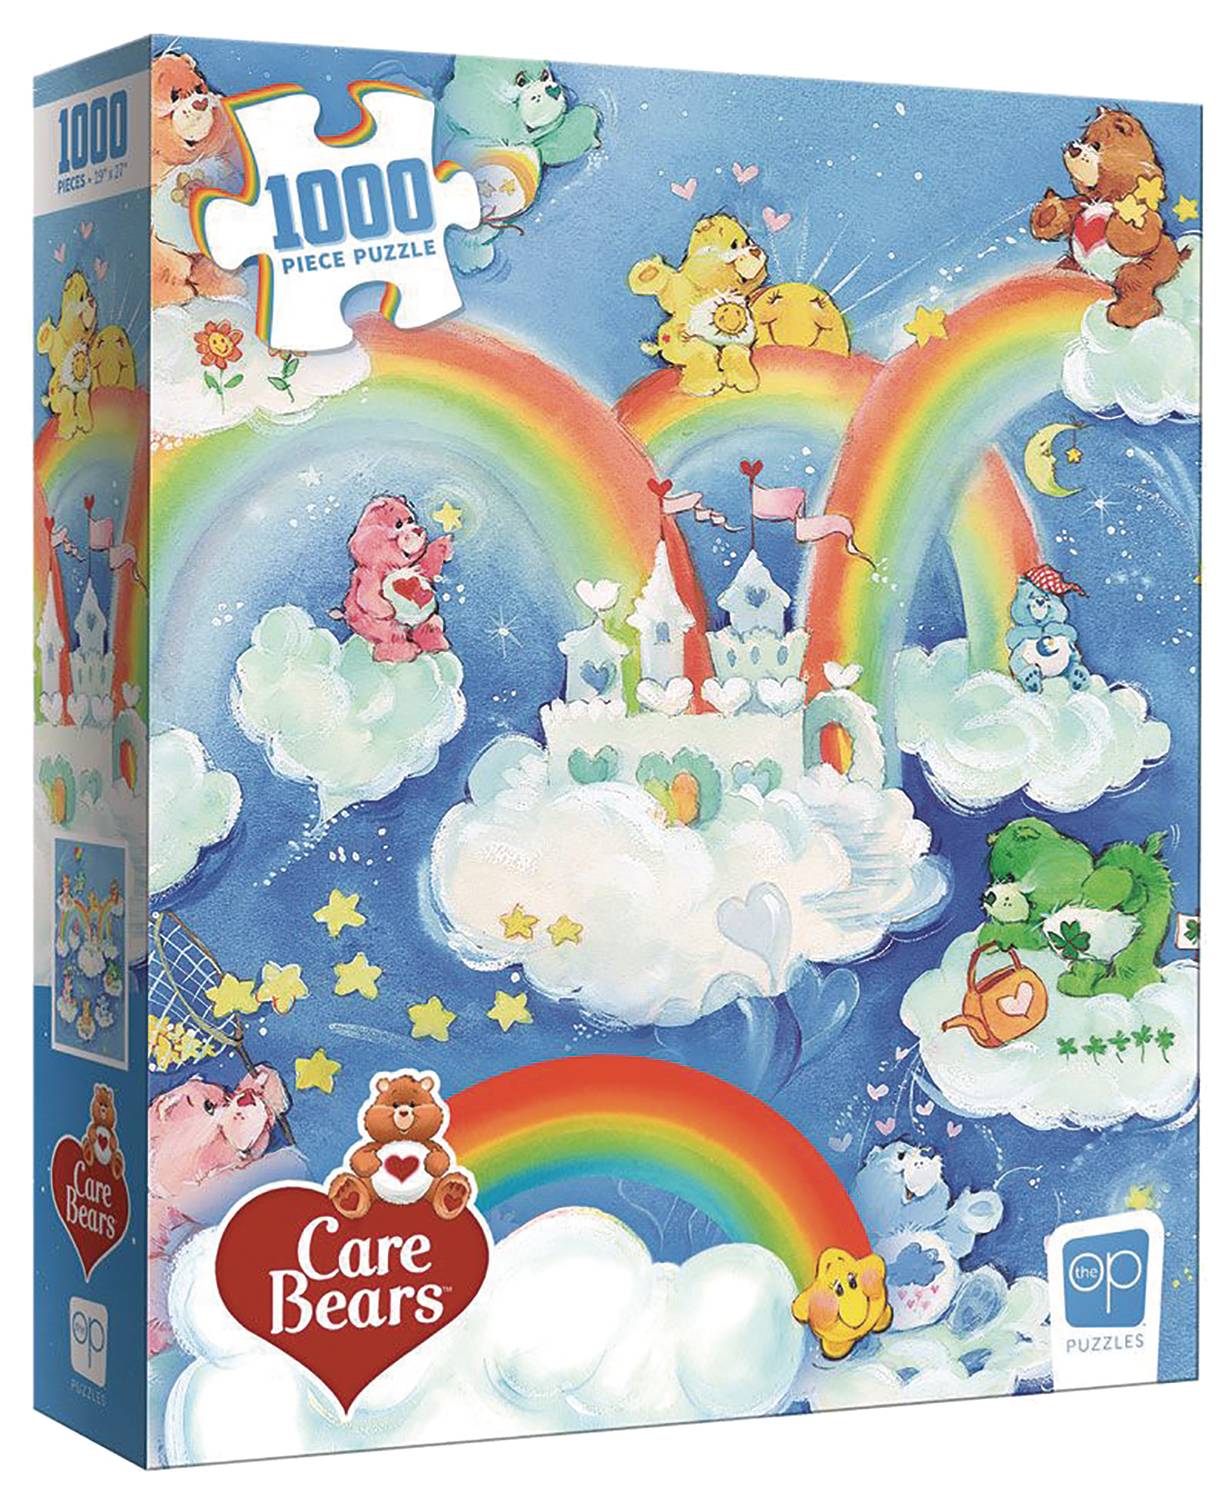 CARE BEARS CARE-A-LOT 1000 PC PUZZLE (C: 0-1-2) | L.A. Mood Comics and Games